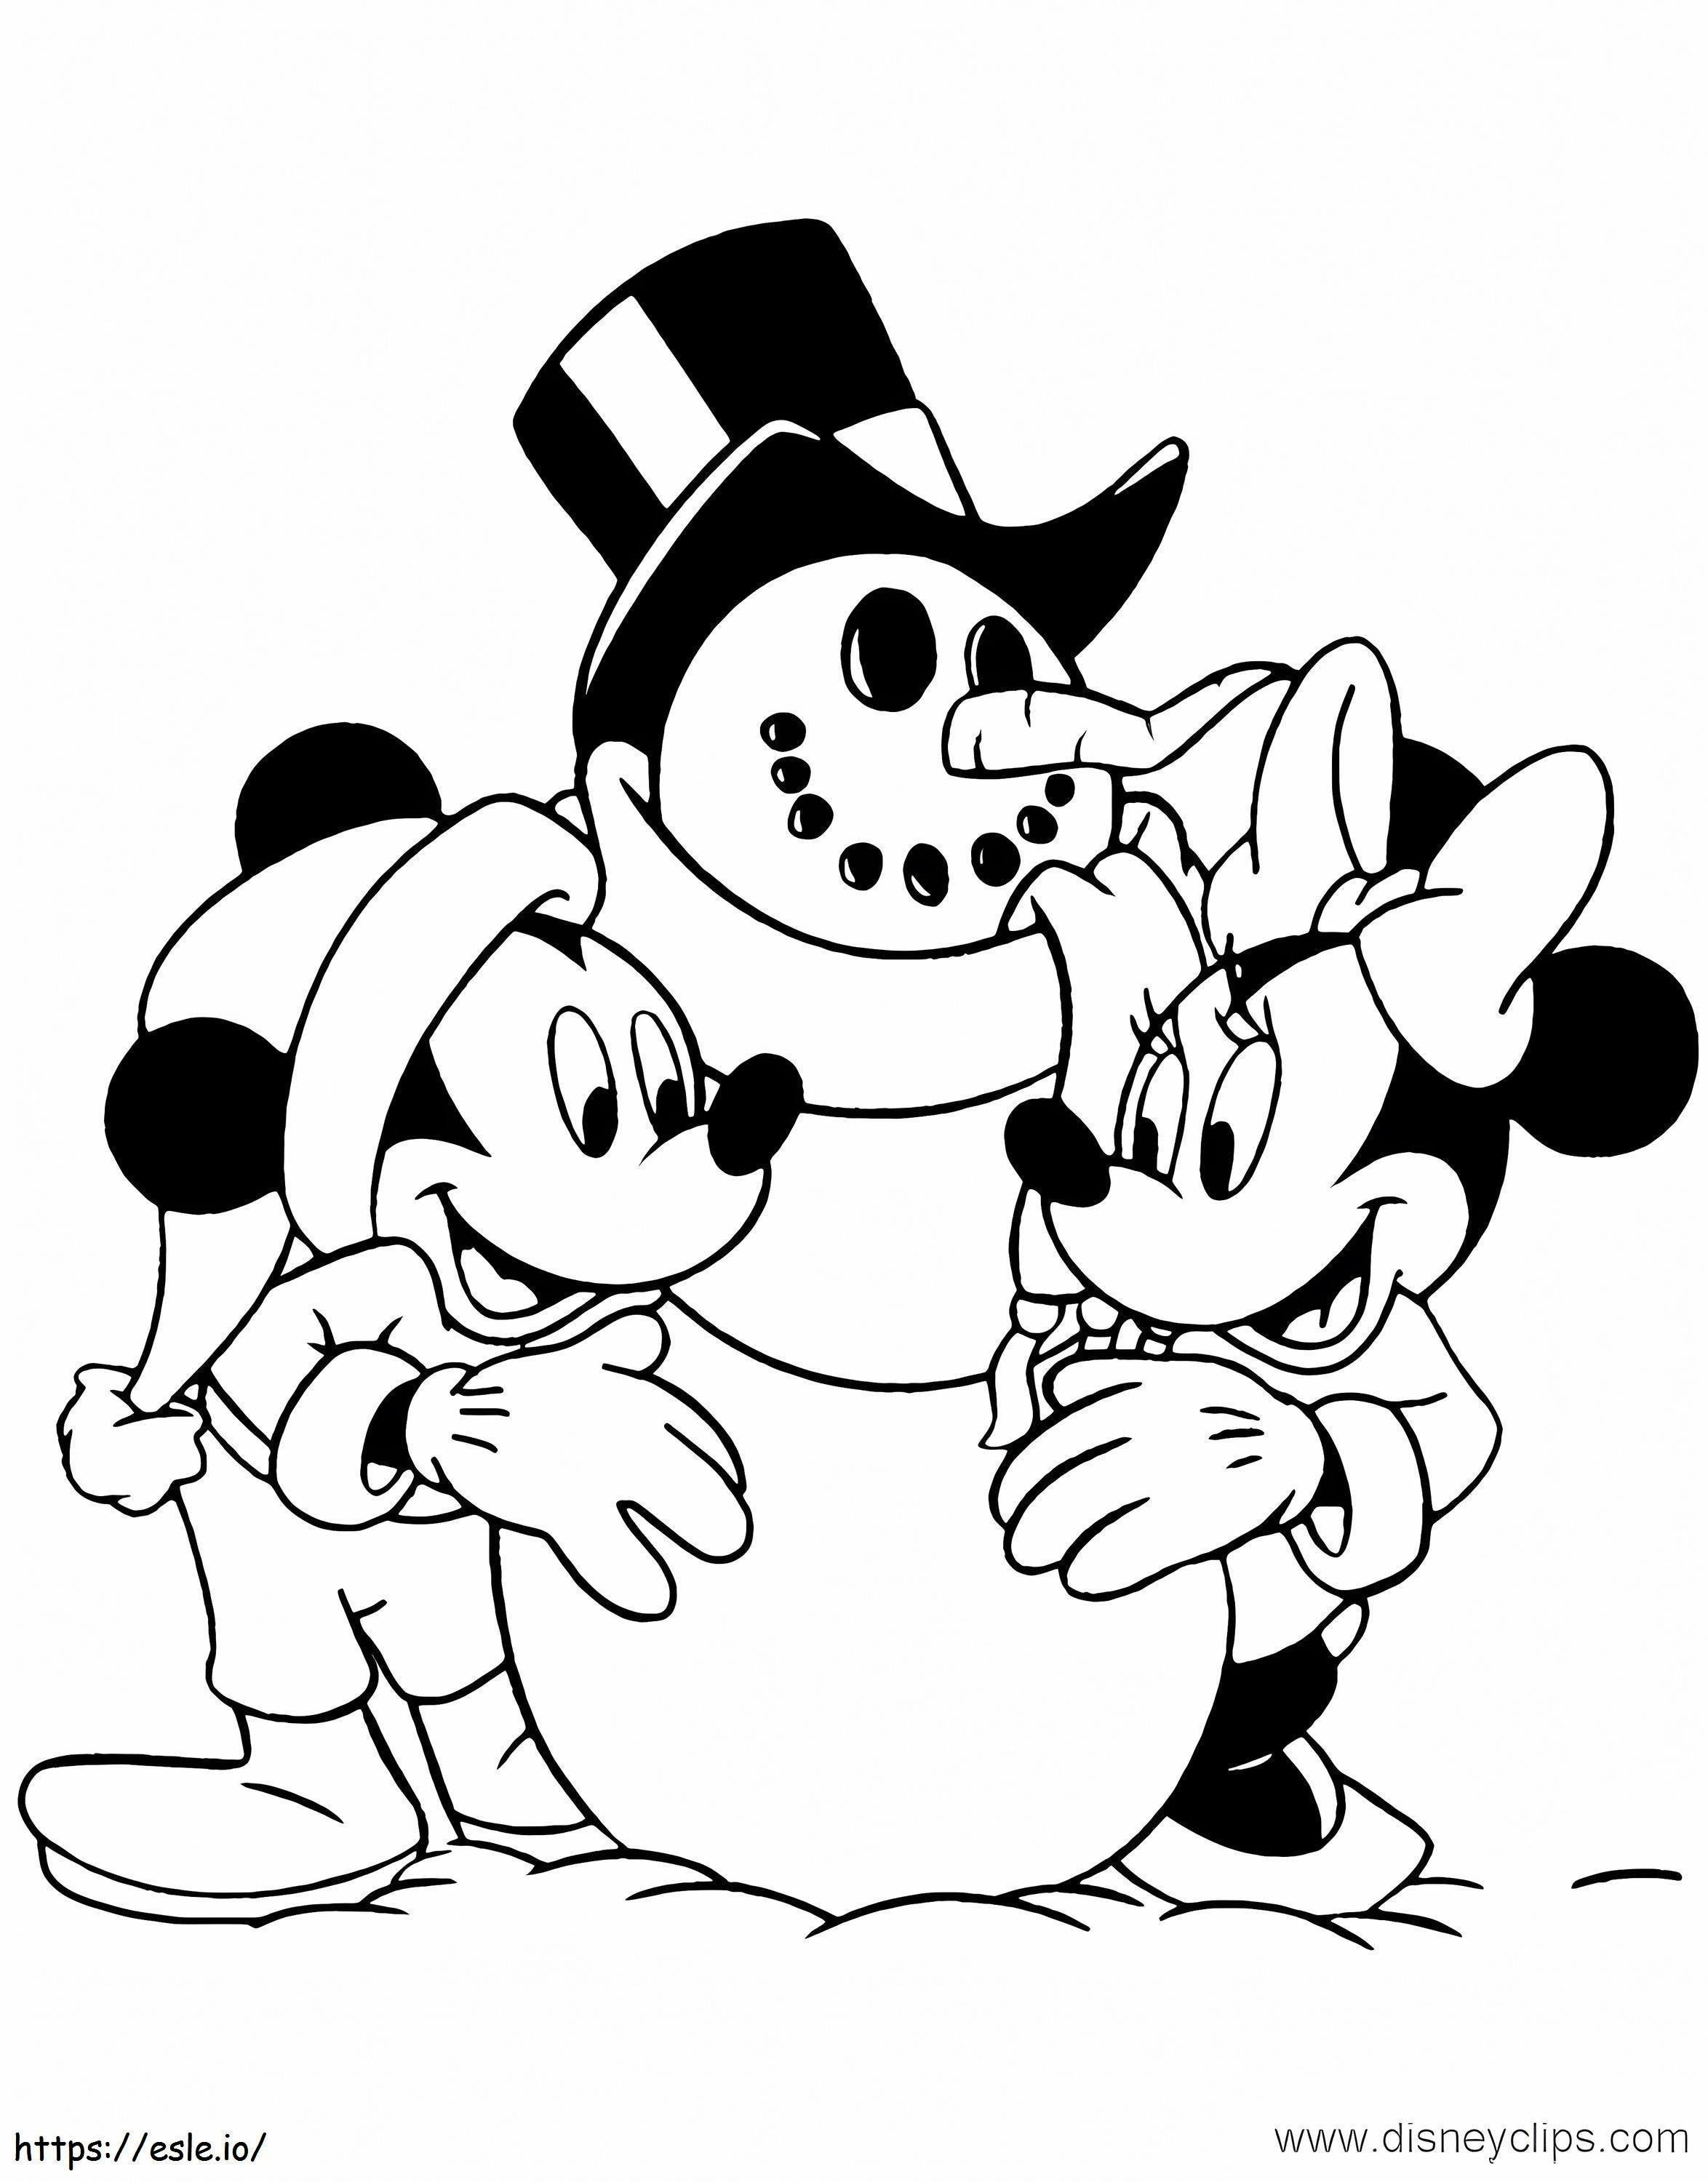 1539922422 Mickey Minnie Snowman Coloring coloring page